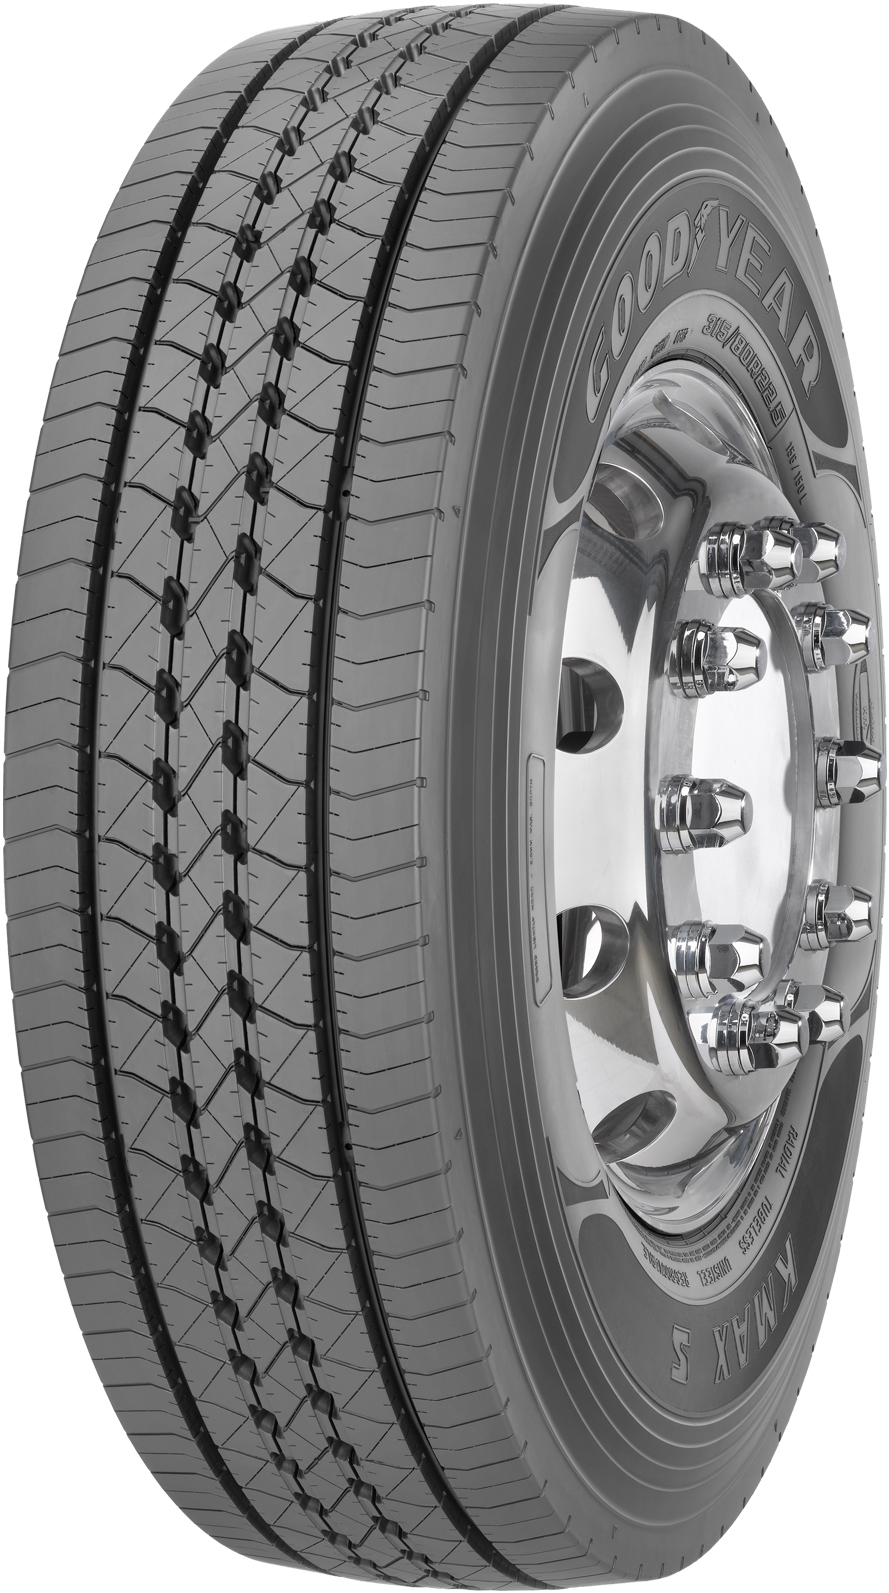 Anvelope camion GOODYEAR KMAXS 315/80 R22.5 156L